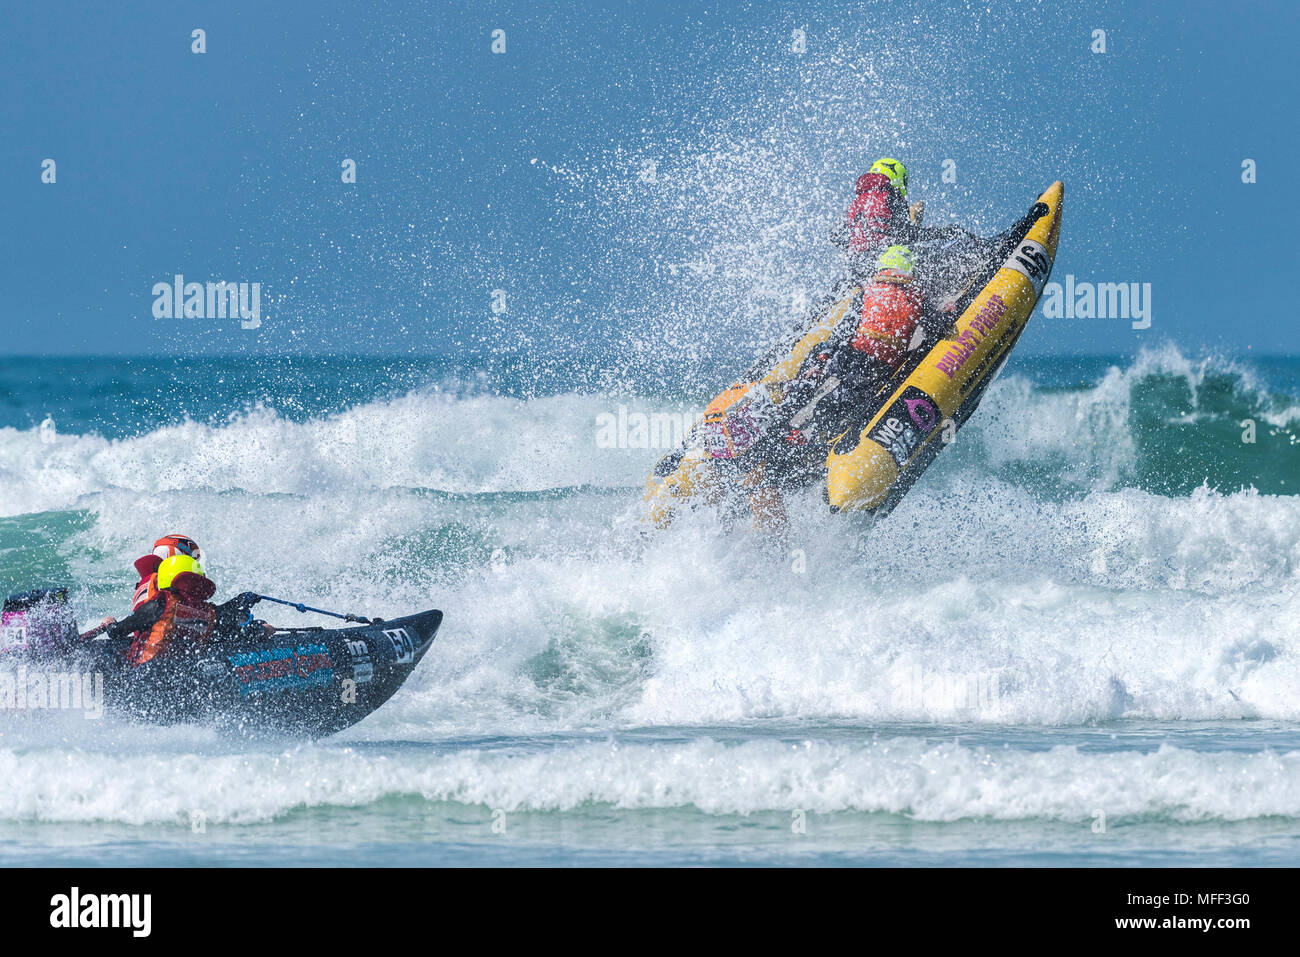 ThunderCat Racing Meisterschaften an den Fistral in Newquay in Cornwall. Stockfoto